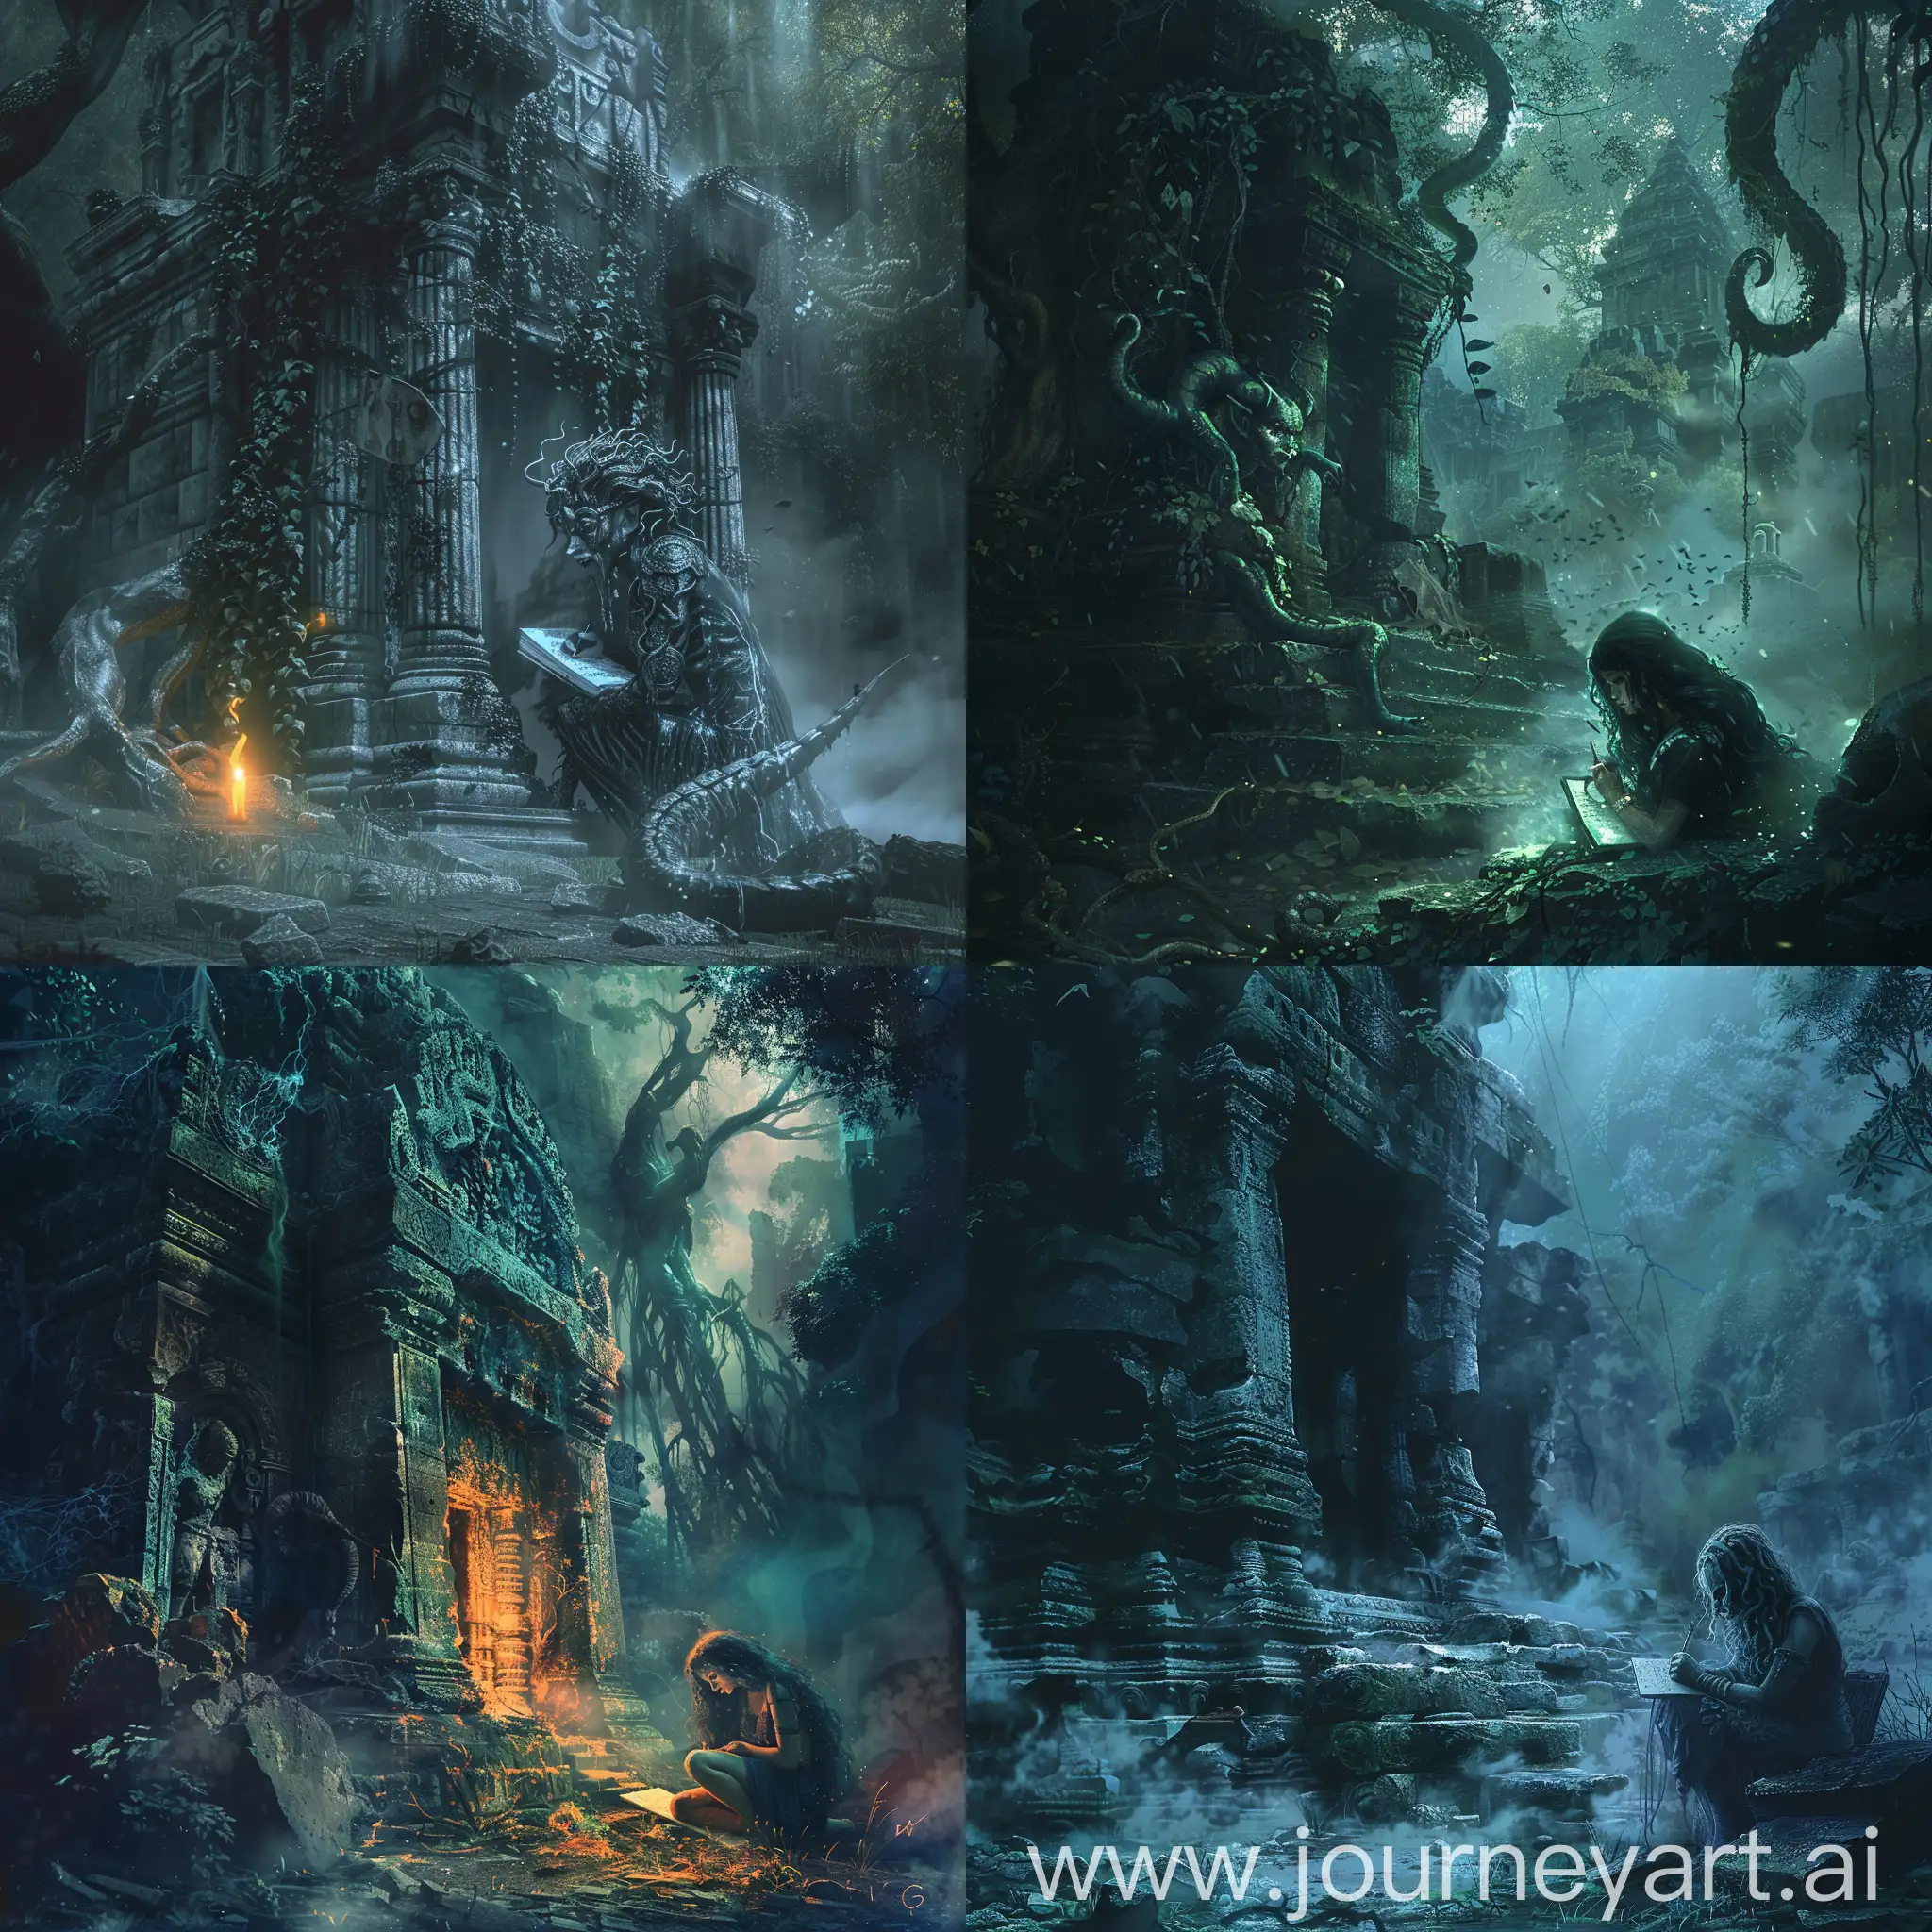 a high quality digital art of (Medusa) next to (abandoned temple), writing her story, in a (mystic forest), fantasy art, detailed illustration, dark atmosphere, magical, female character, mythical creature, ancient ruins, eerie glow, misty ambiance, surreal, mystical vibes, 4k